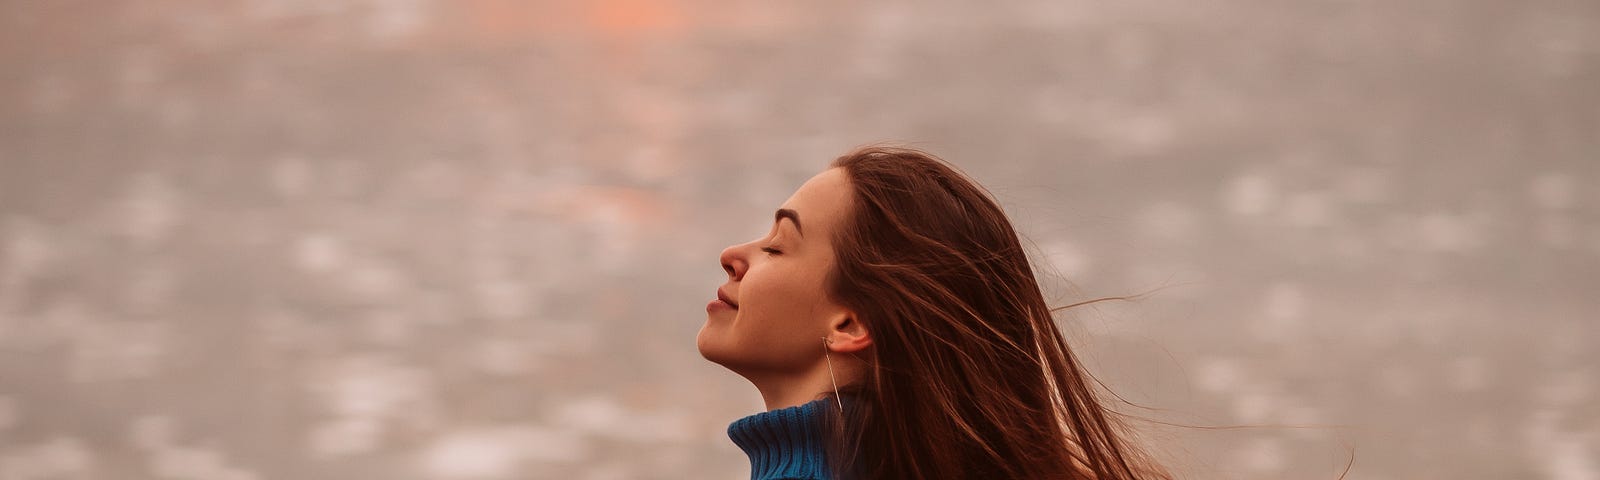 Young woman with eyes closed on windy beach